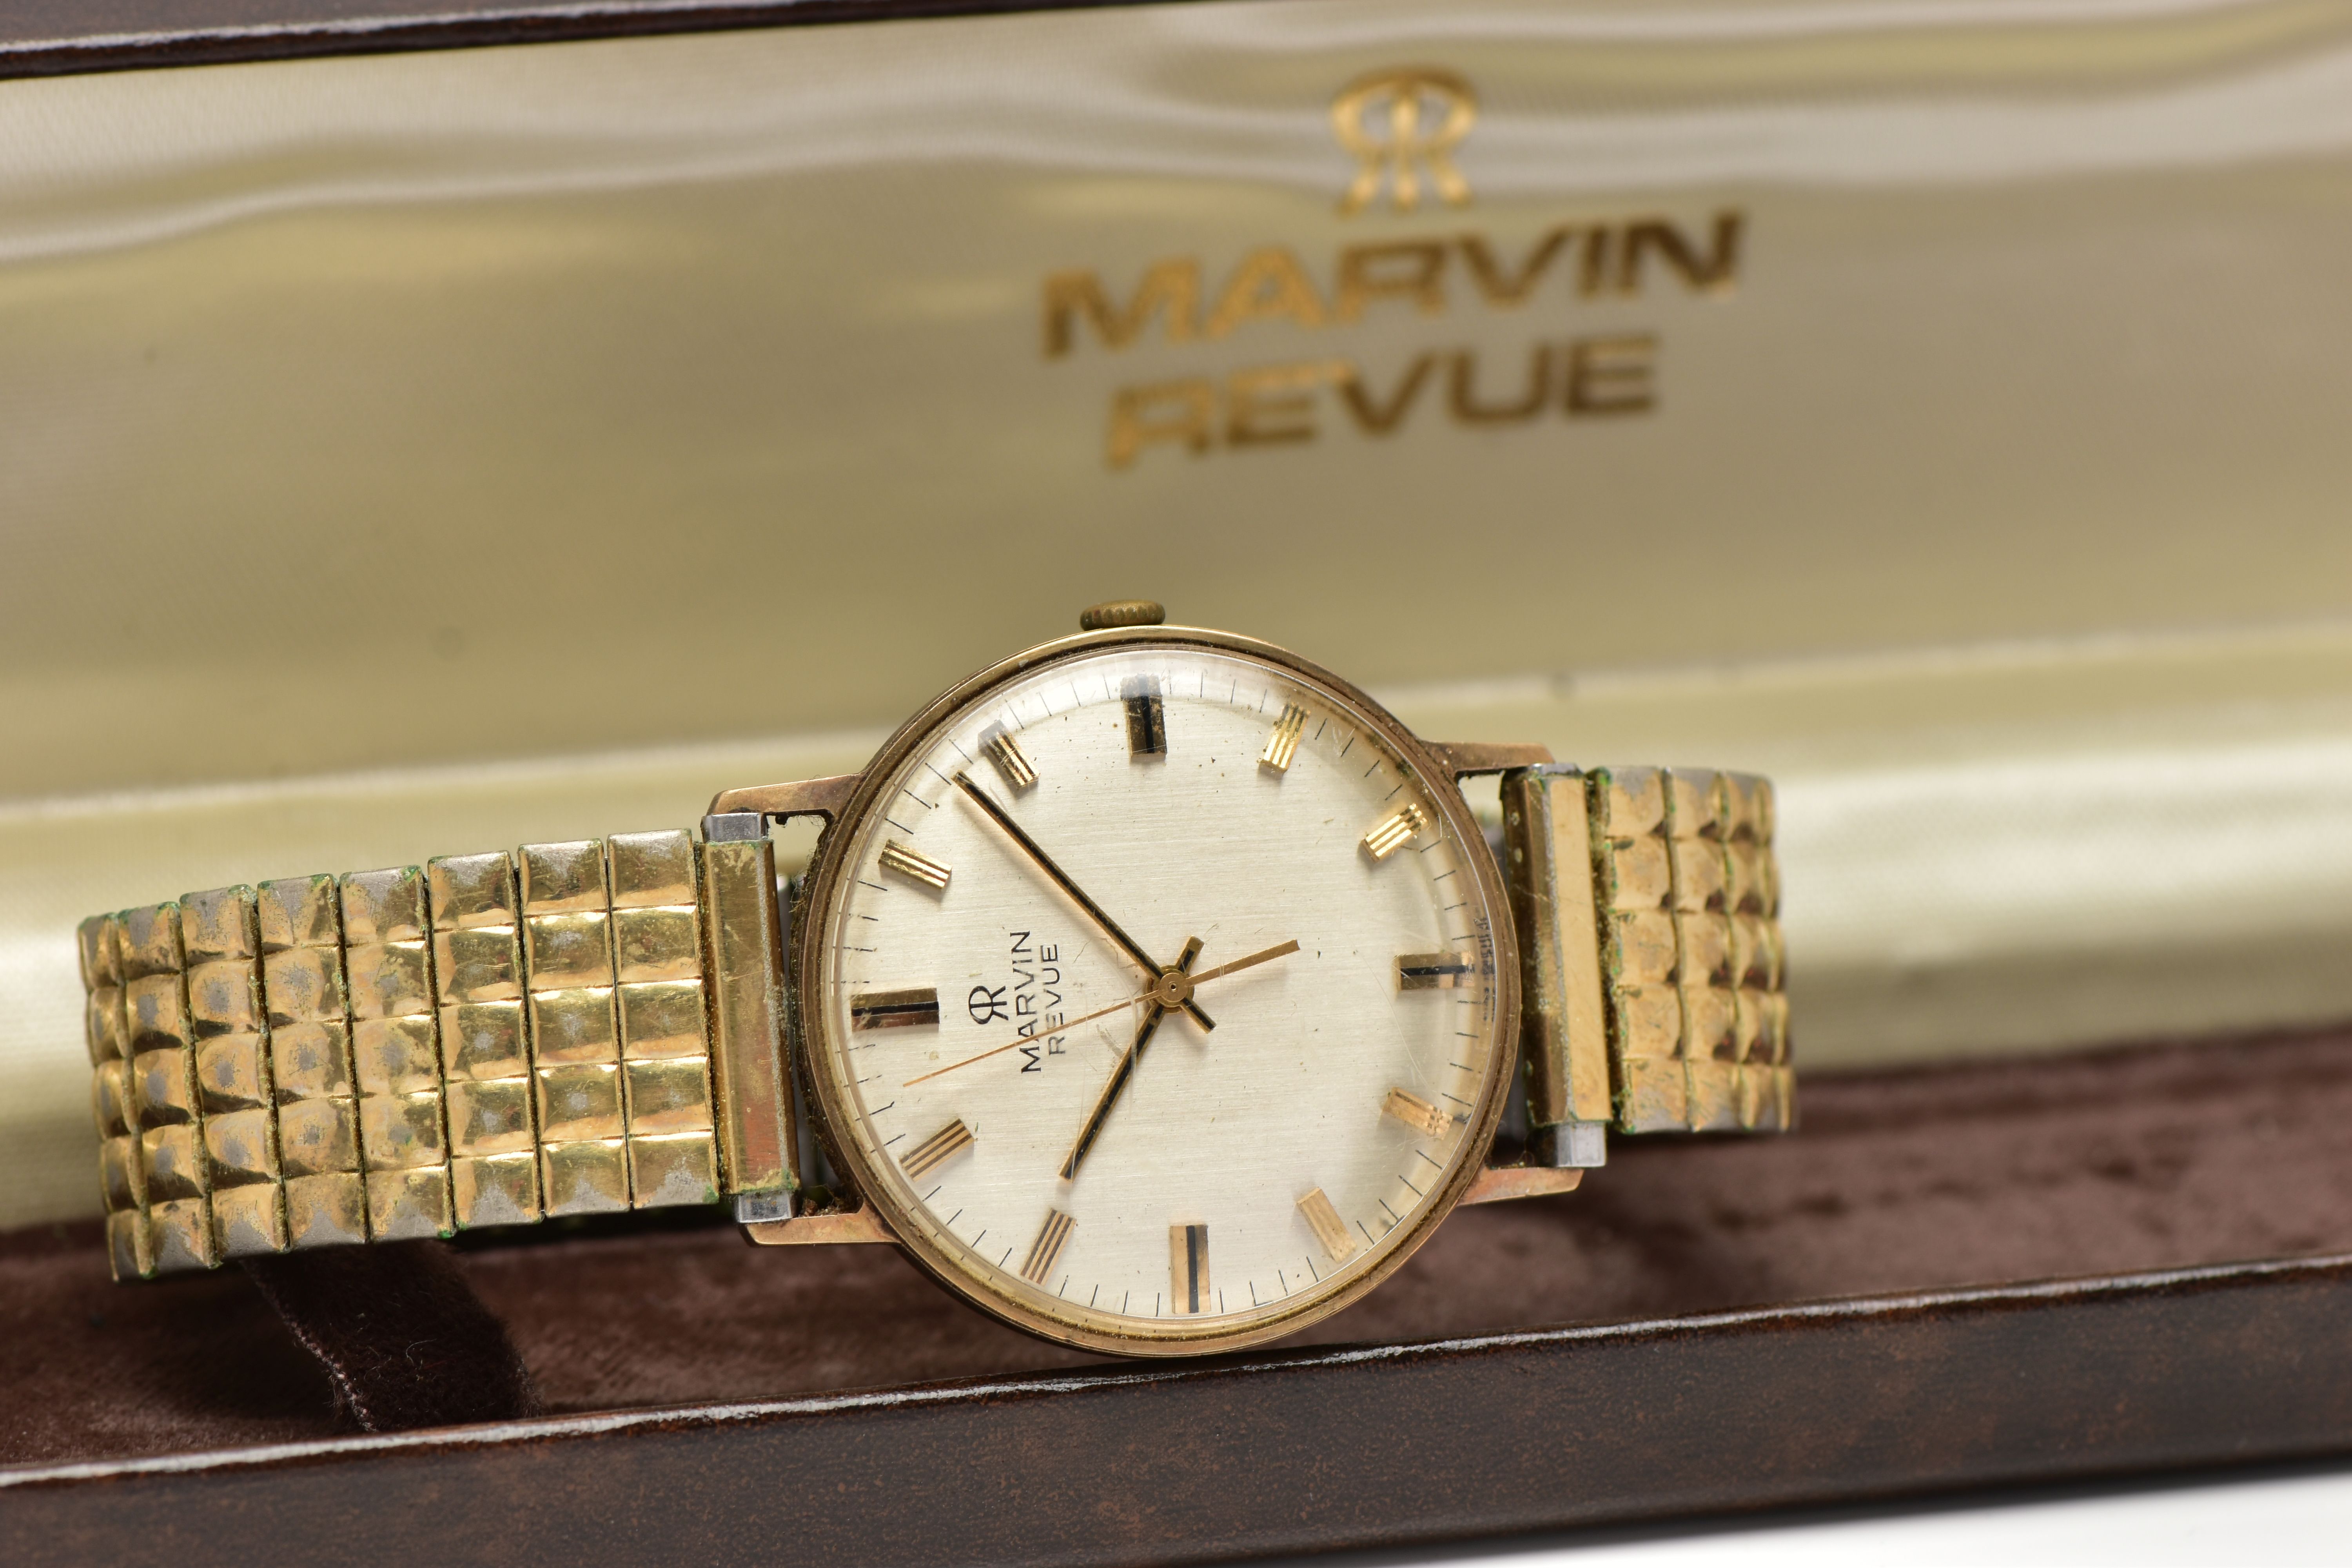 A 9CT GOLD 'MARVIN' WRISTWATCH, manual wind, round dial, signed 'Marvin Revue', baton markers, - Image 4 of 6